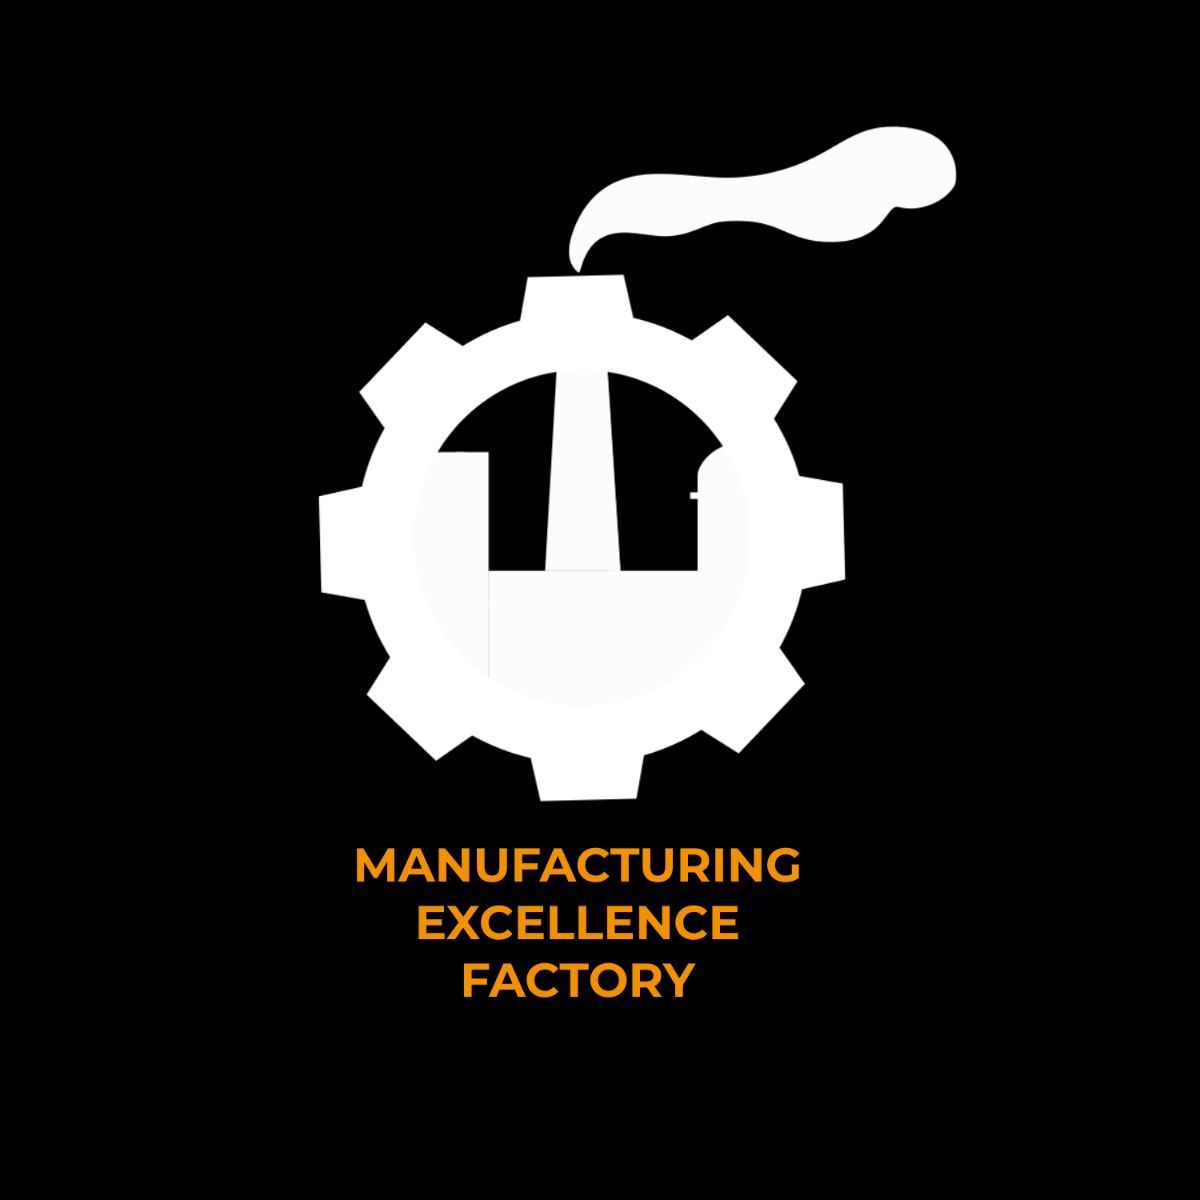 Manufacturing Excellence Factory Logo